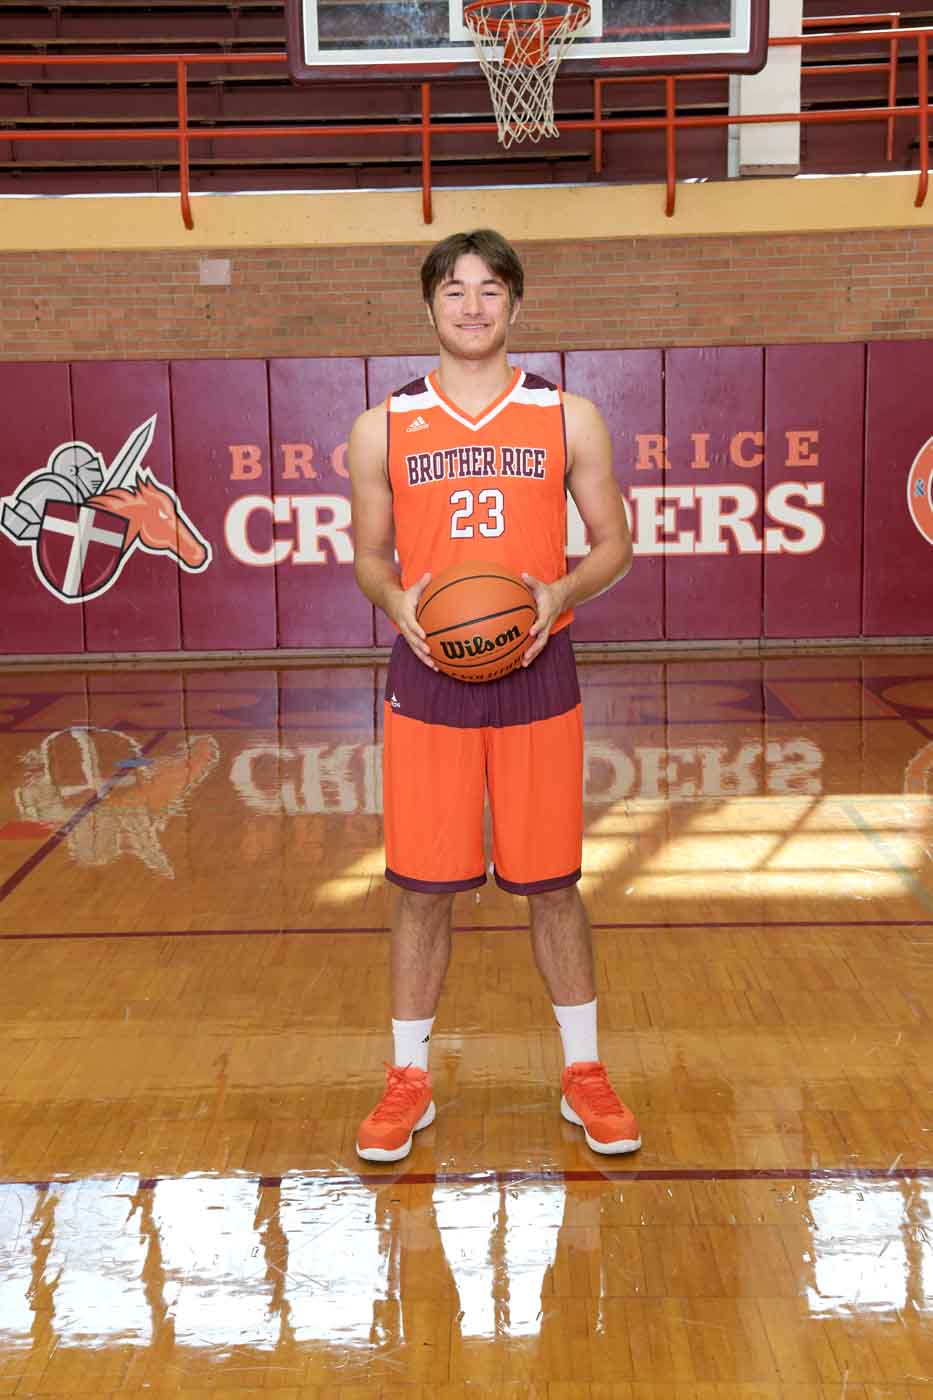 Brother Rice basketball player sport by Tom Killoran Photography